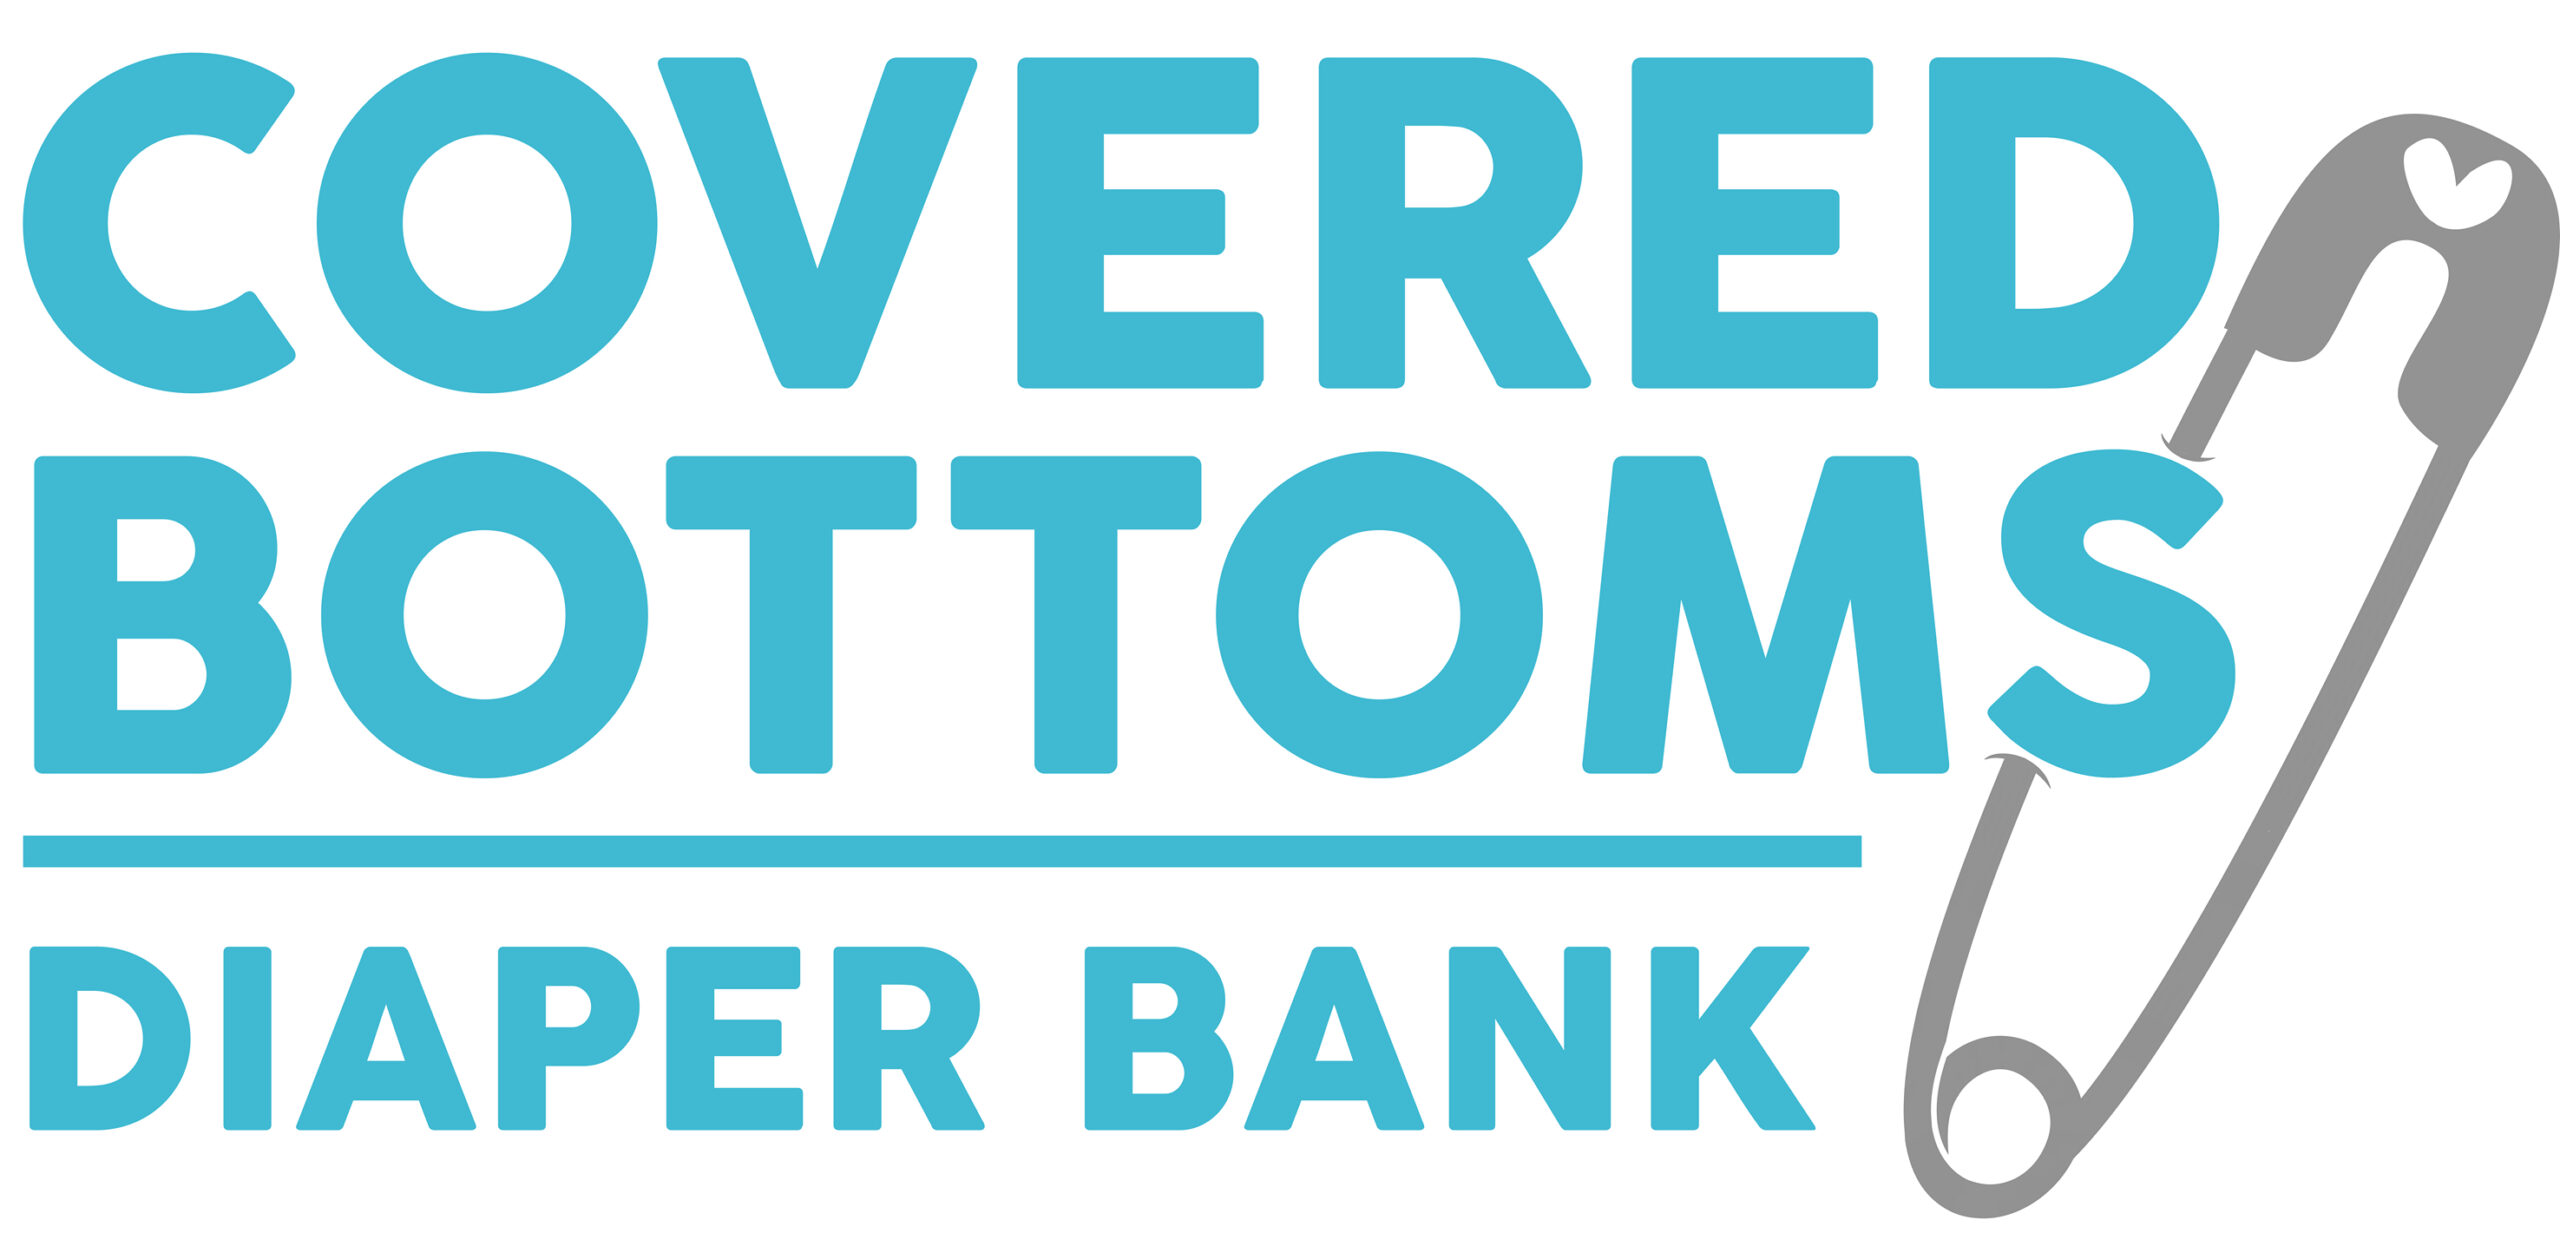 Covered Bottoms Diaper Bank